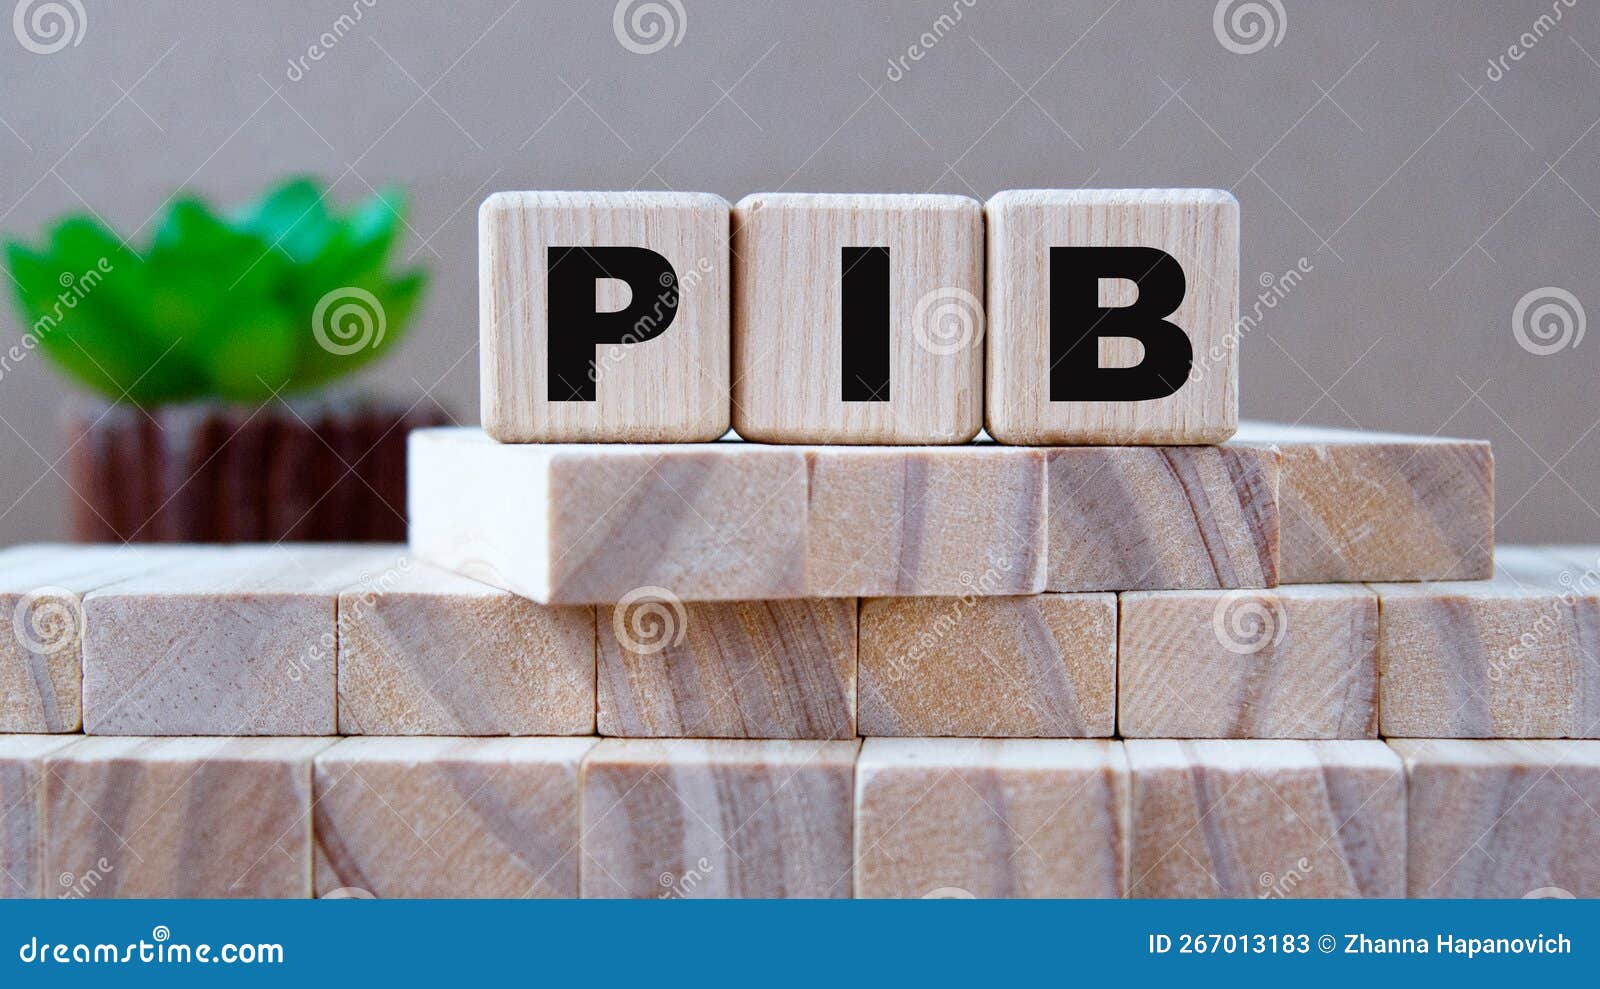 pib - acronym on wooden cubes on the background of wooden blocks and cactus